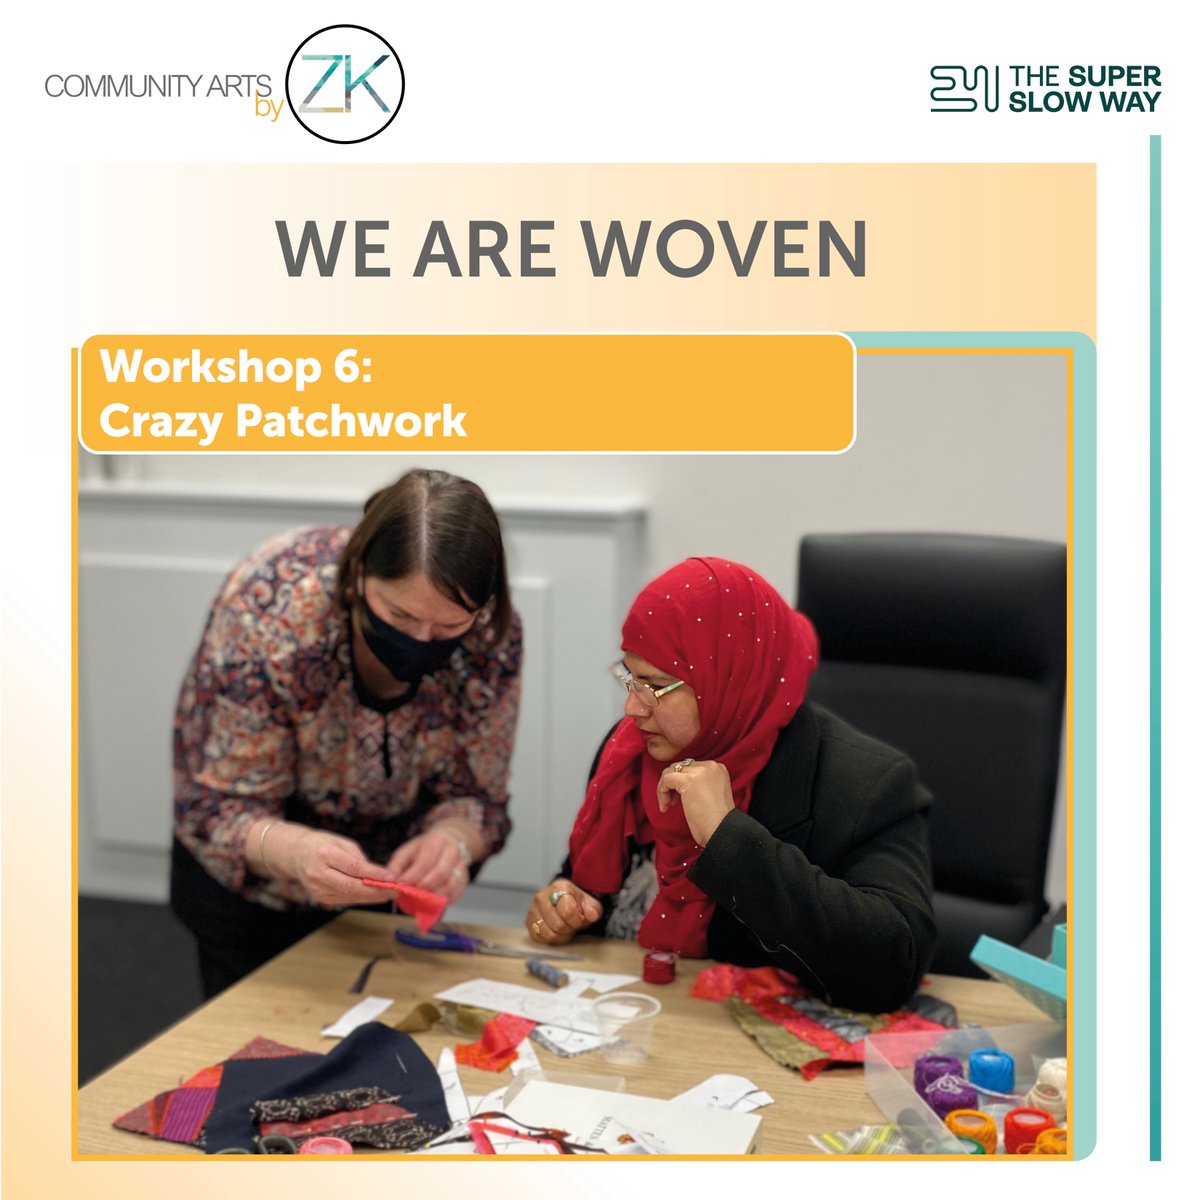 In yesterday's workshop with Jenny Waterson, we made crazy patchwork samples! We had a great time!

Thank you to Jenny and the Super Slow Way for this fantastic project!

@jw4art @Superslowway @BPRCVS @InSitu_1 @NorthlightE #art #textiles #crazypatchwork #communityarts #workshop https://t.co/Z2Ix5iAf6I